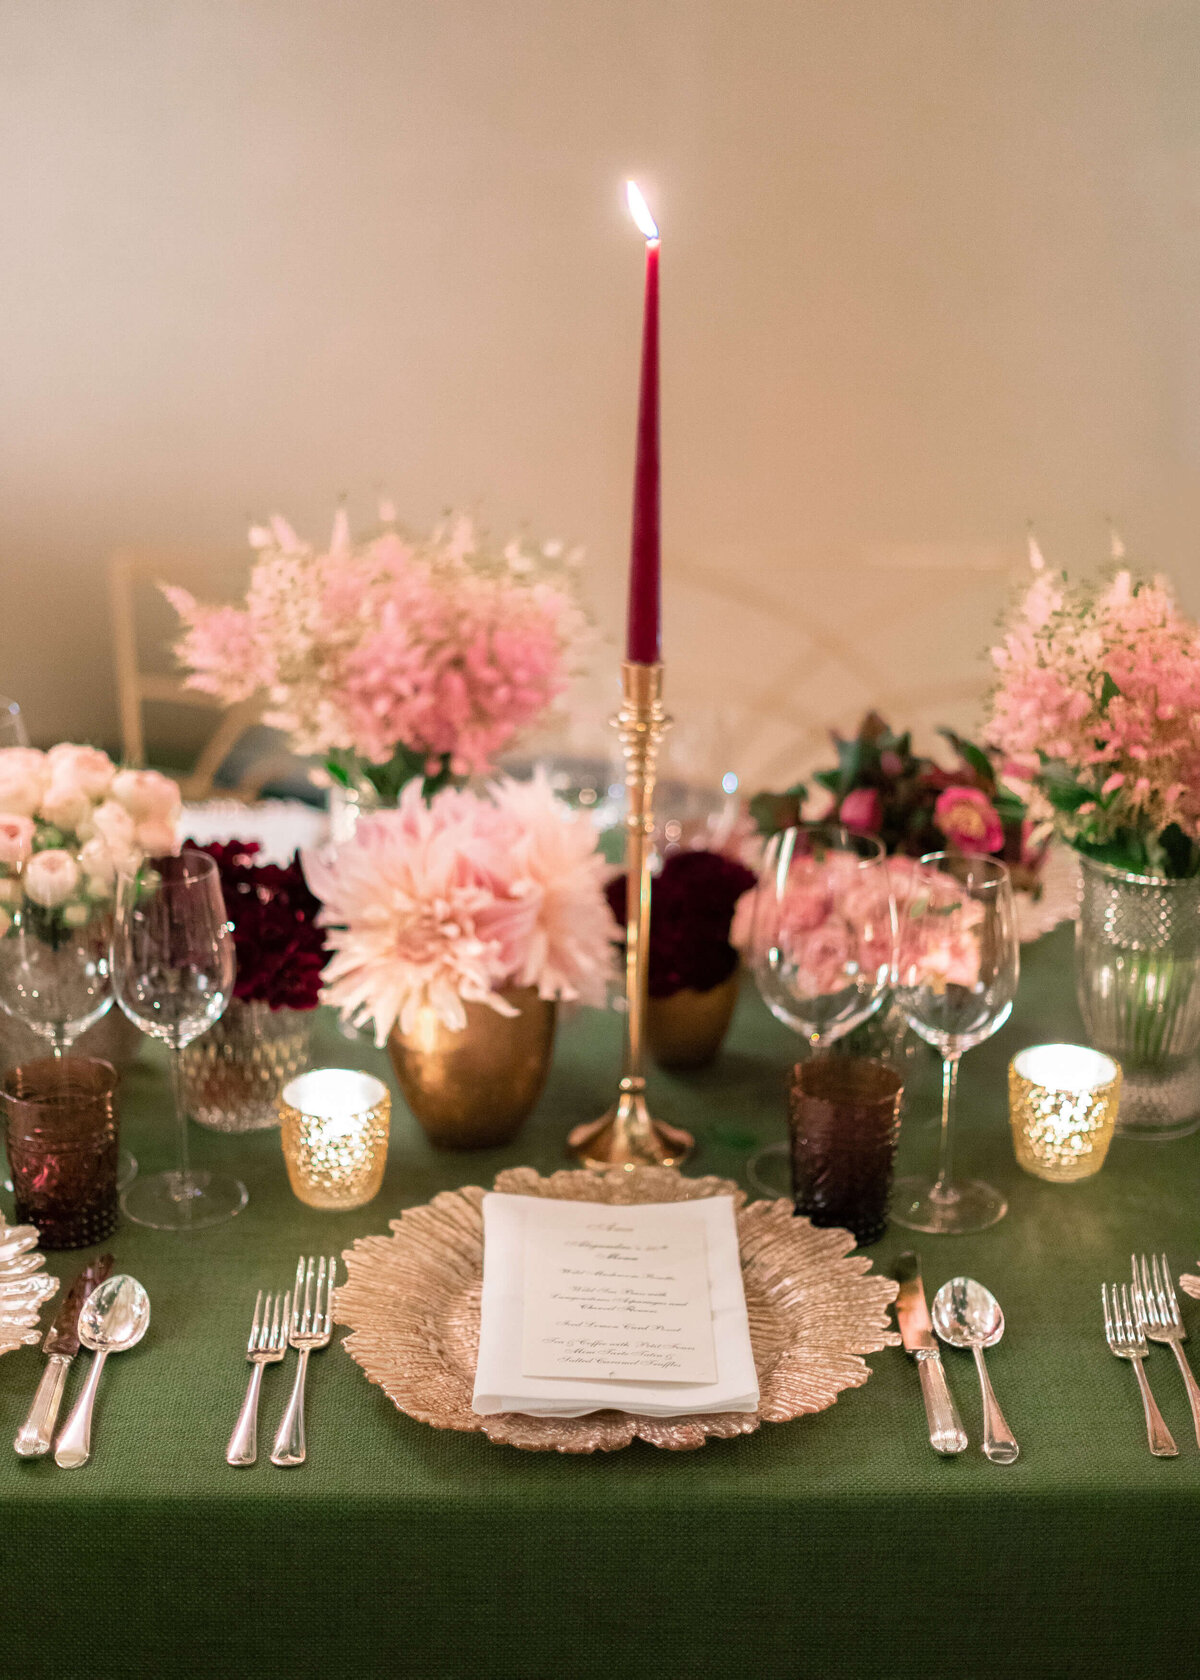 chloe-winstanley-events-gsp-placesetting-candlelit-wildabout-flower